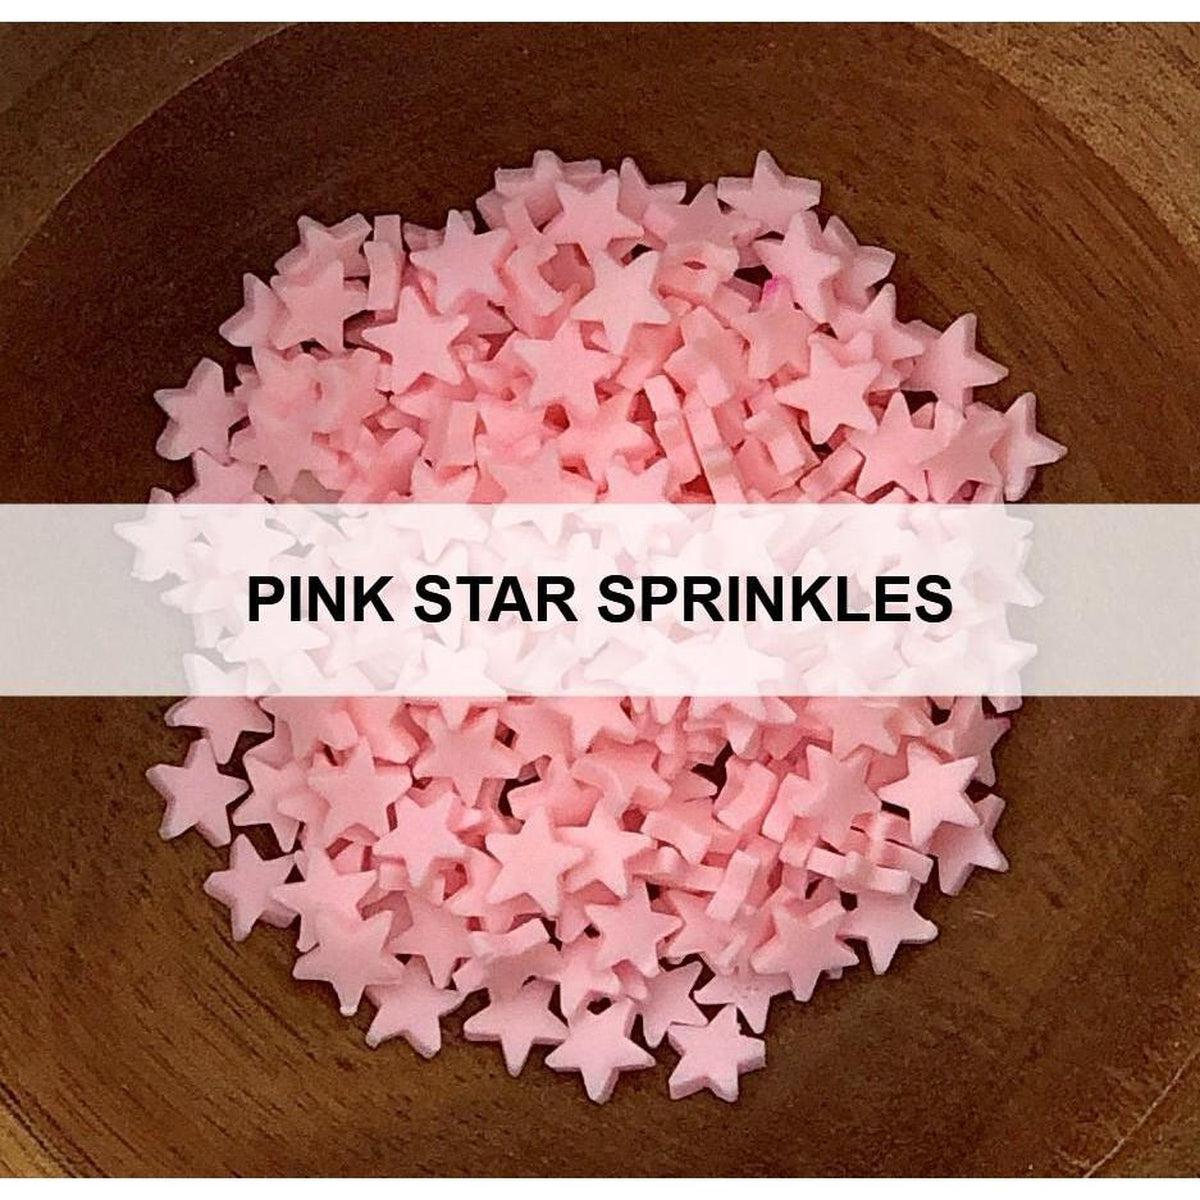 Pink Star Sprinkles by Kat Scrappiness - Kat Scrappiness